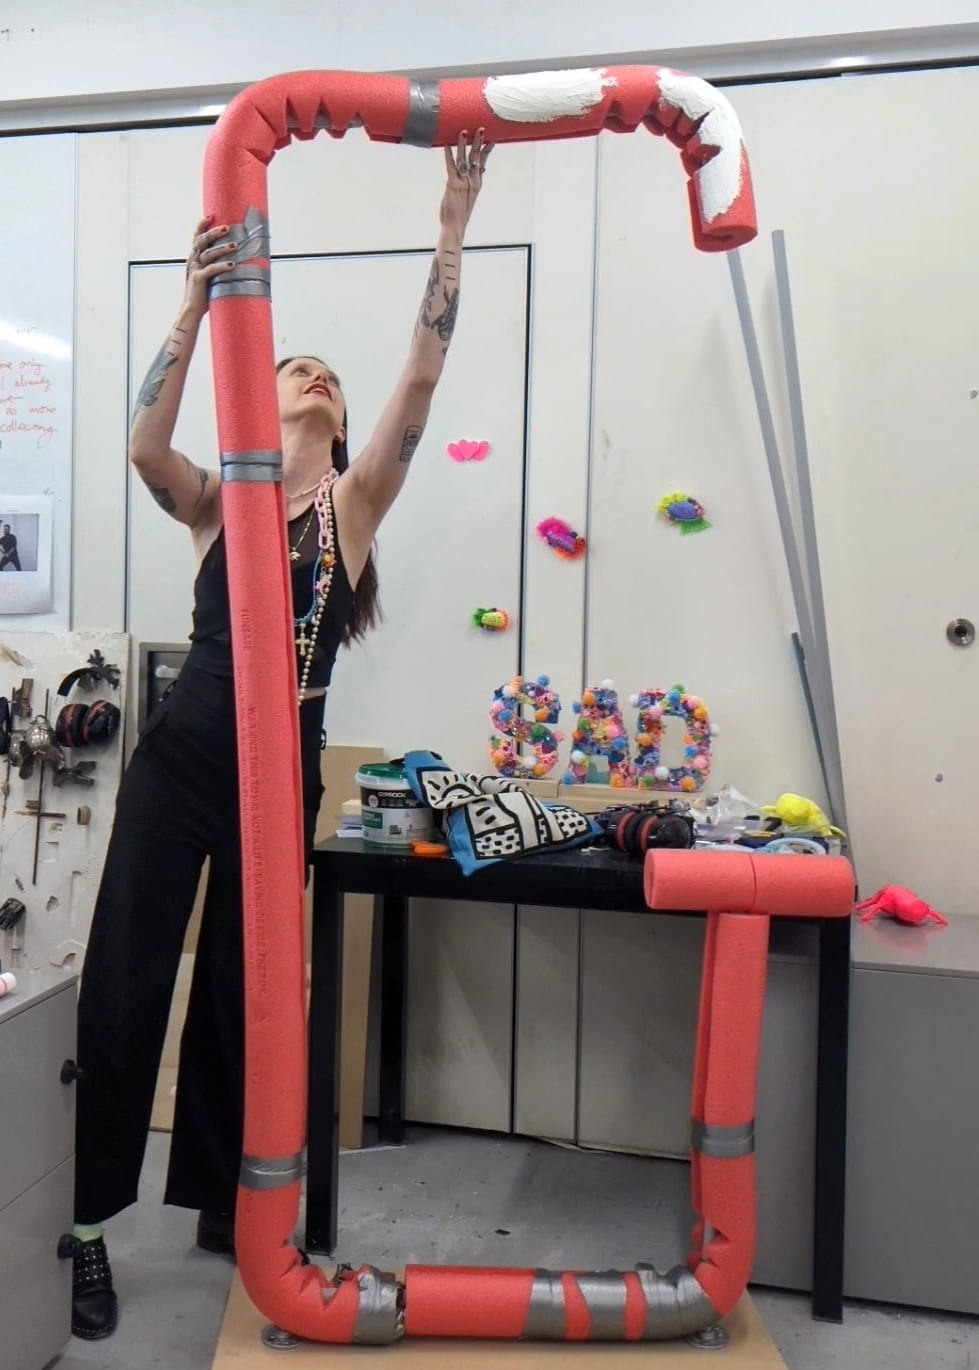 Emmica Lore is working on a sculpture of a giant G made from pool noodles.